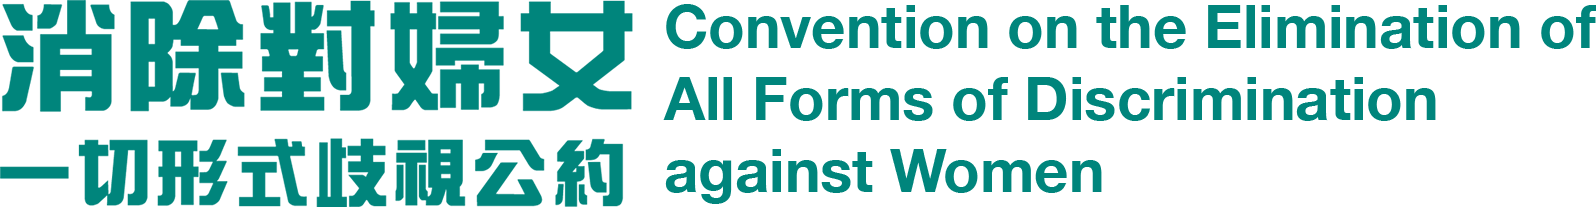 Convention on the Elimination of All Forms of Discrimination against Women: Home